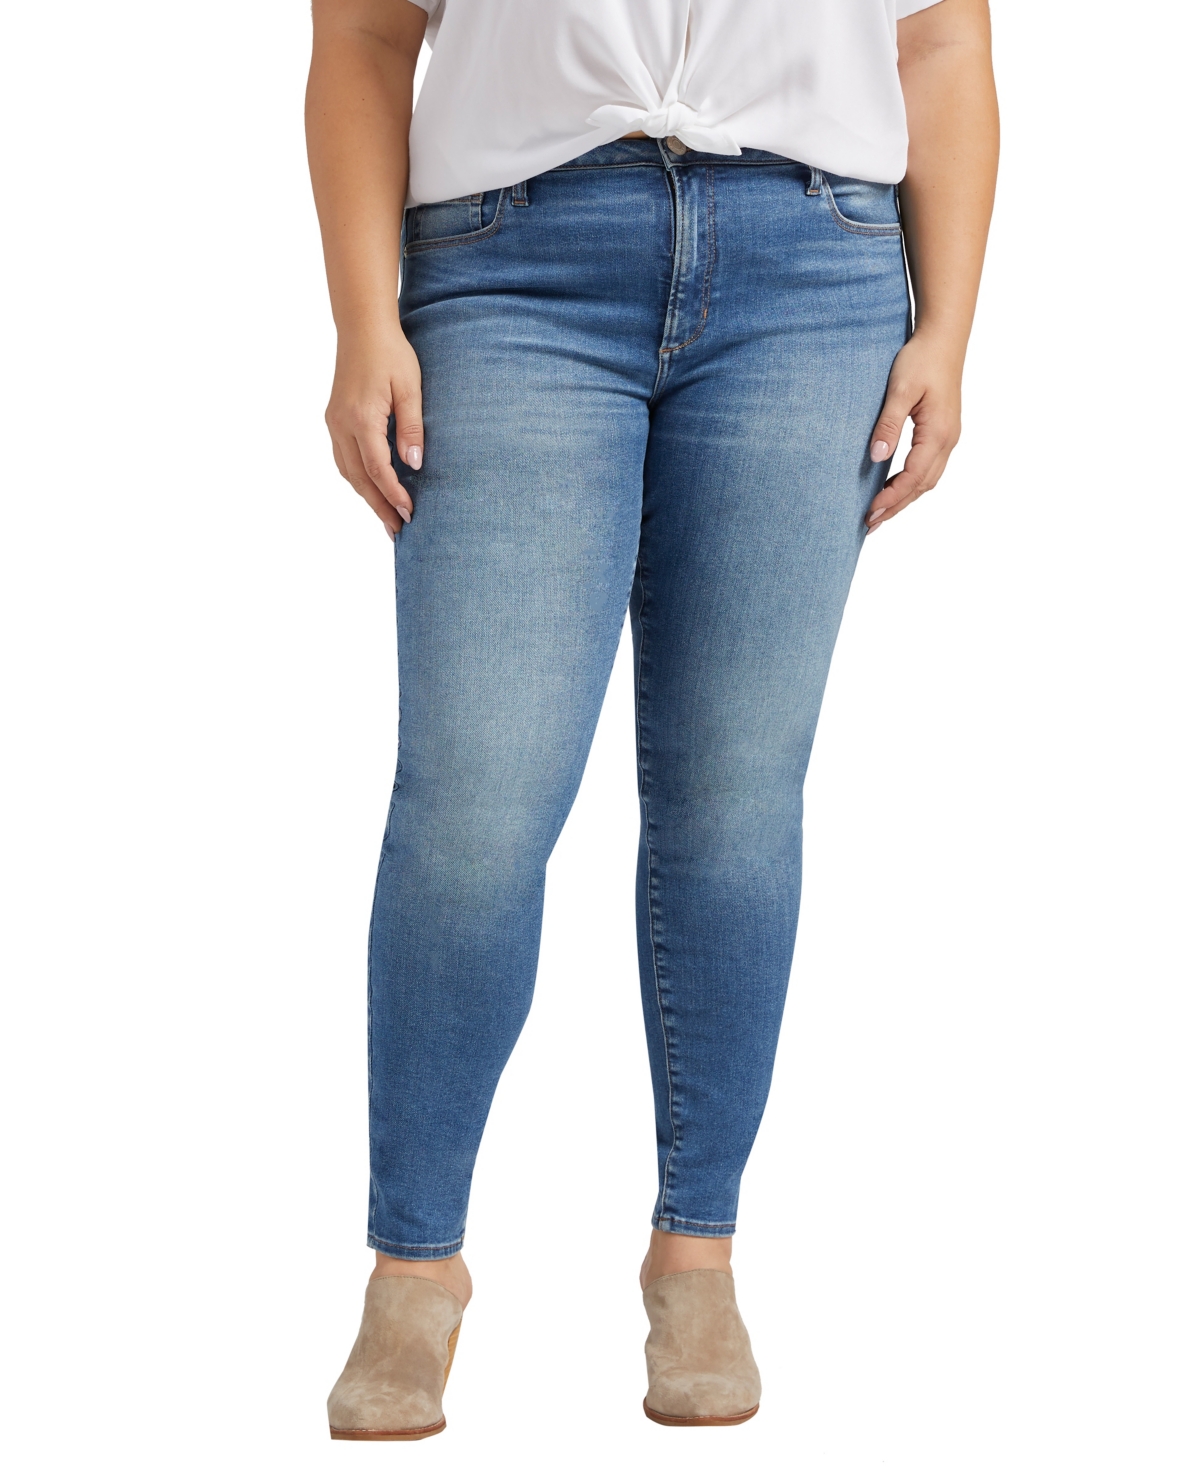 Plus Size One Size Fits Two Forever Stretch High Rise Skinny Jeans - Indigo Blue